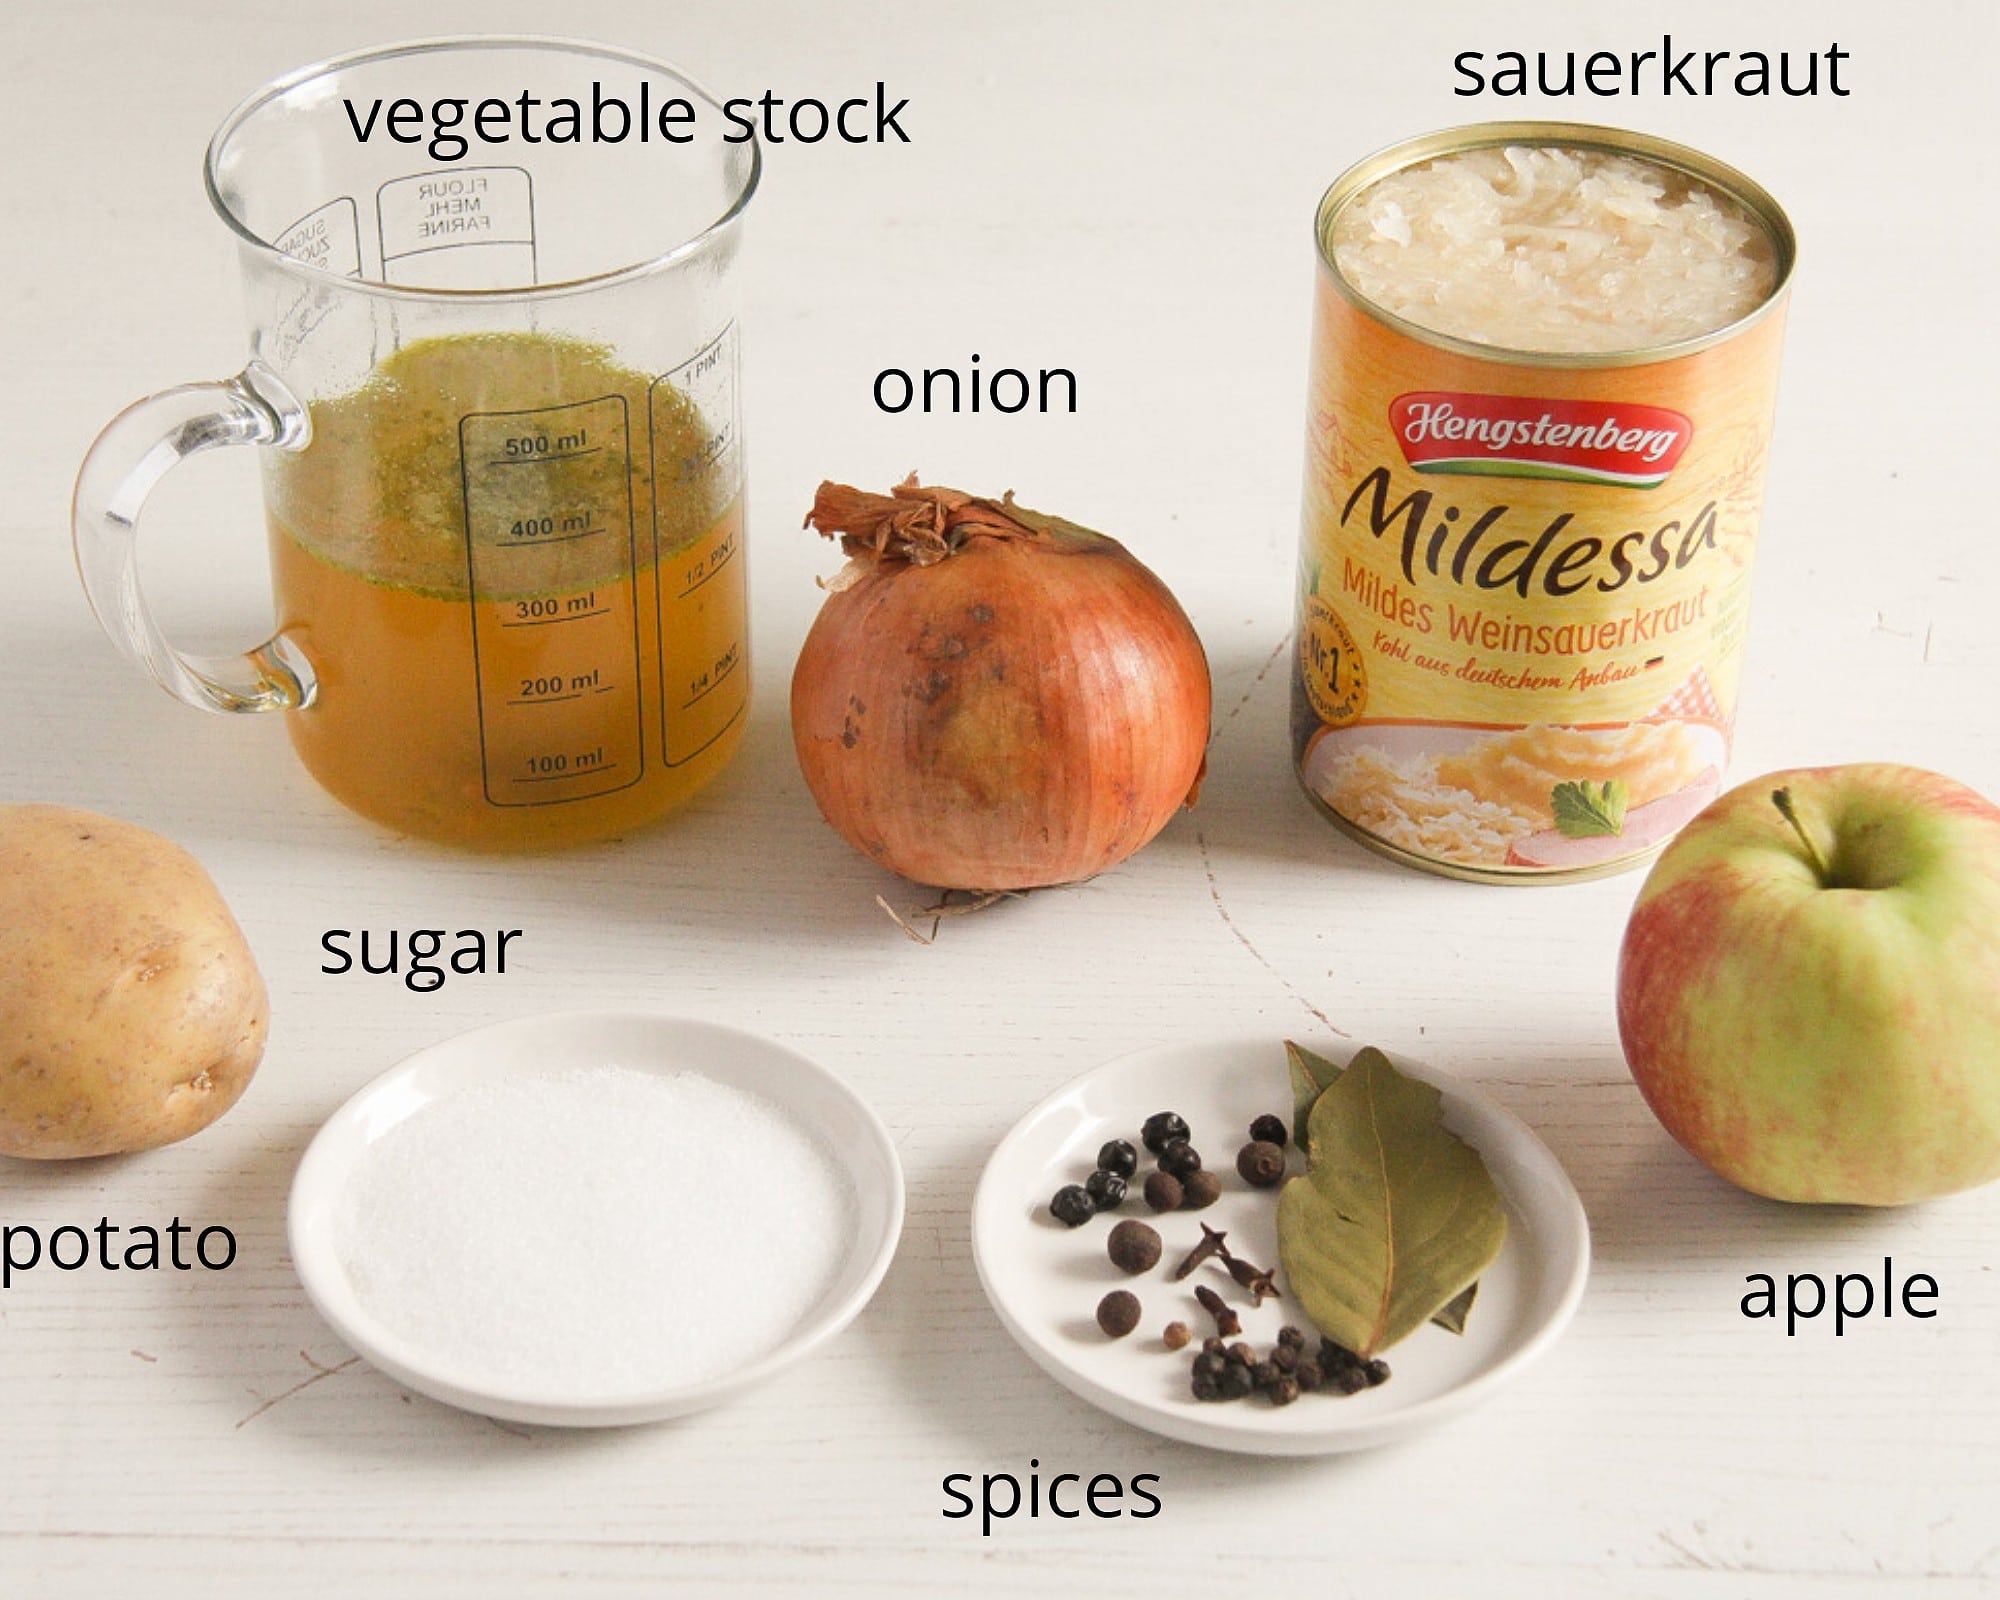 ingredients for making sauerkraut from a can